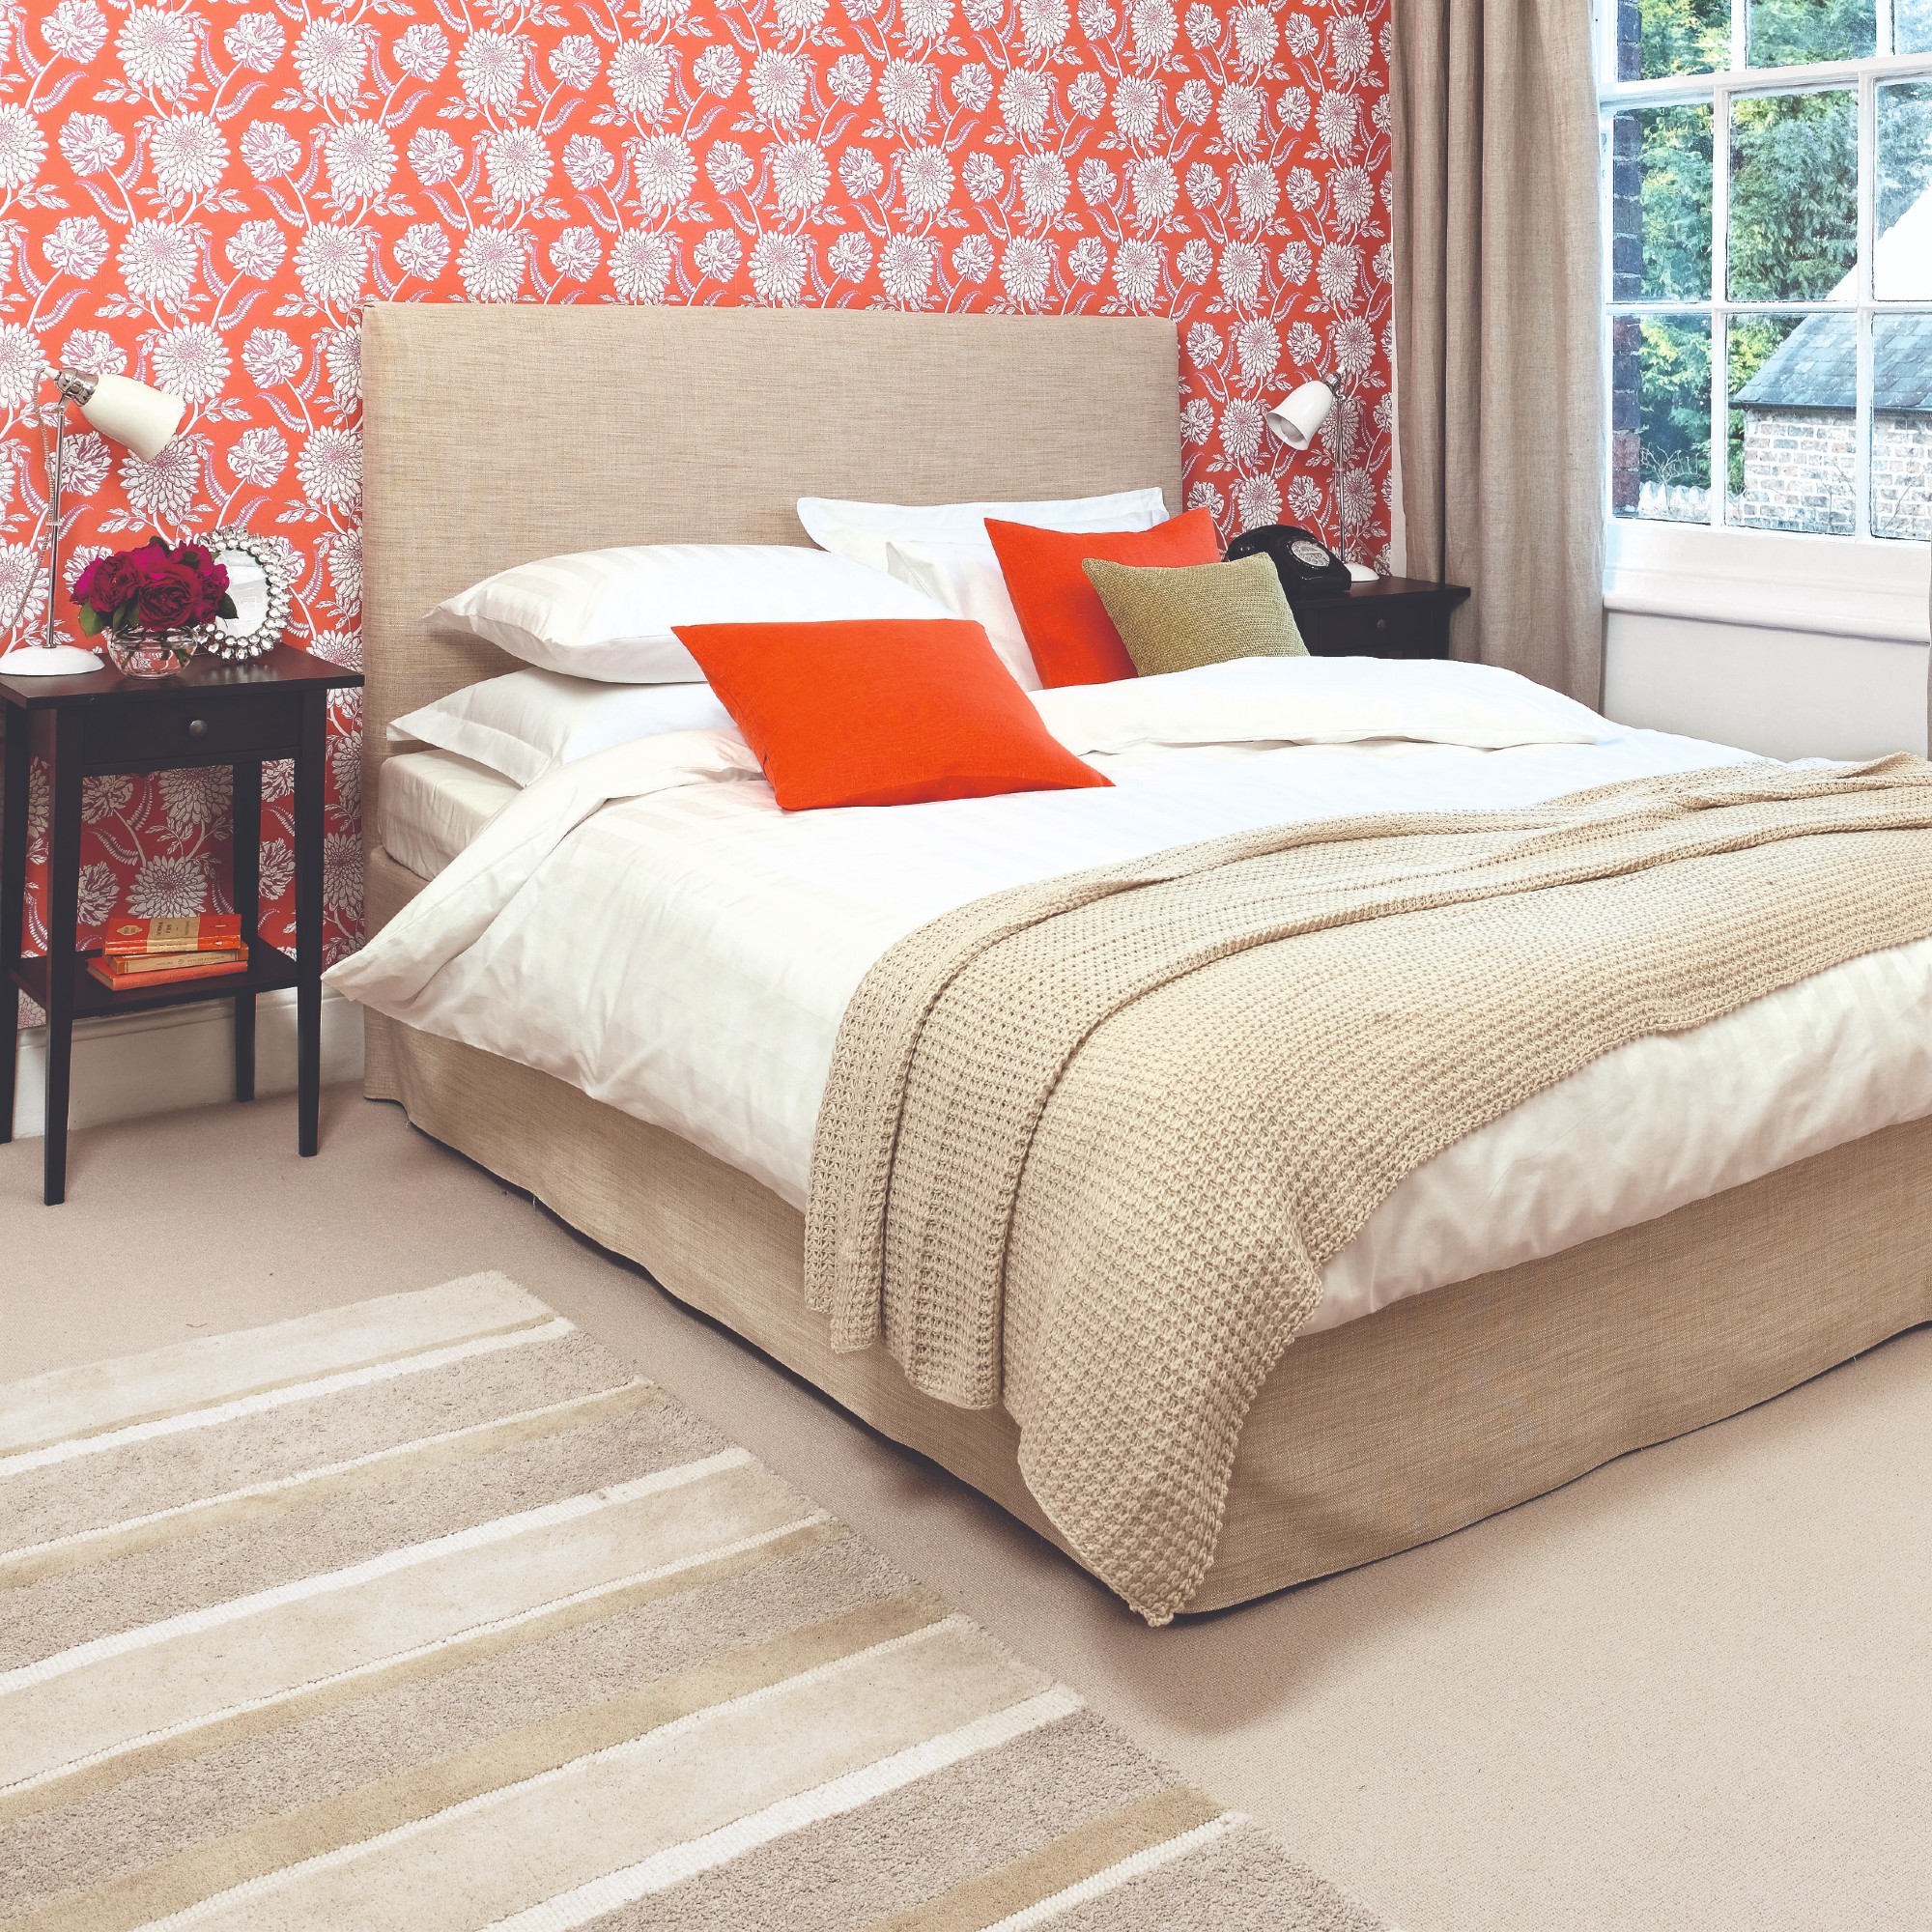 A bedroom in a neutral colour scheme with bright orange cushions and floral wallpaper